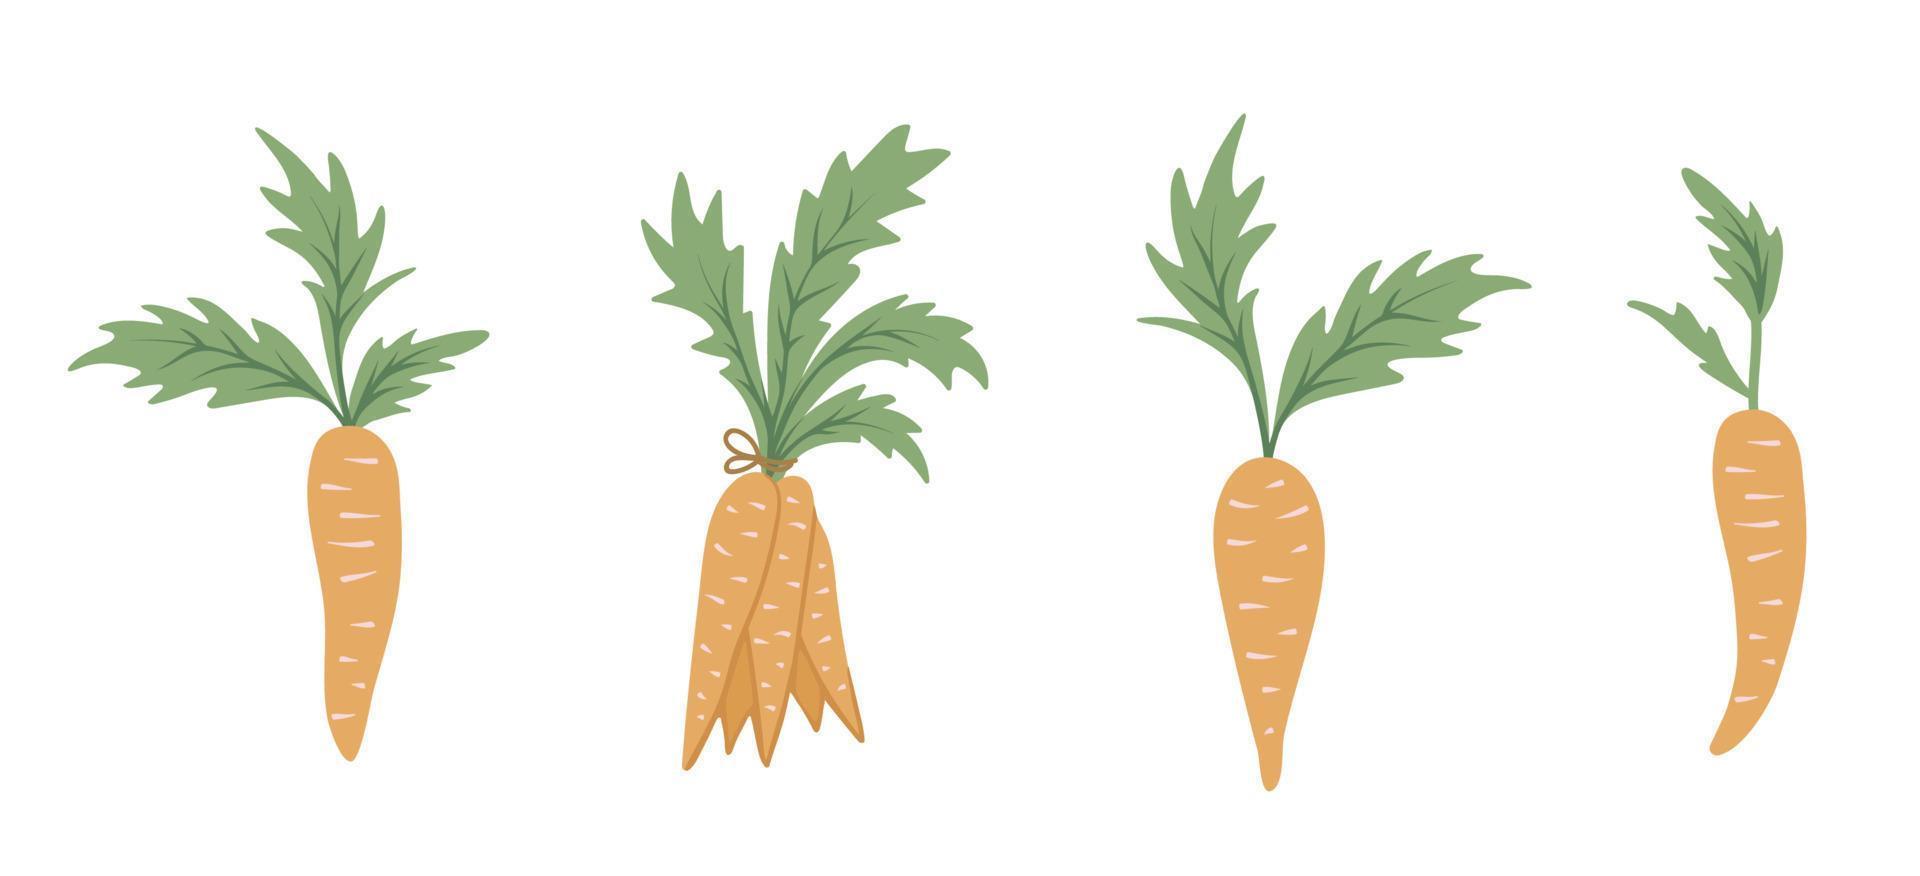 Vector set of cartoon style carrots. Flat simple illustration with root vegetables. Clip art for children design.